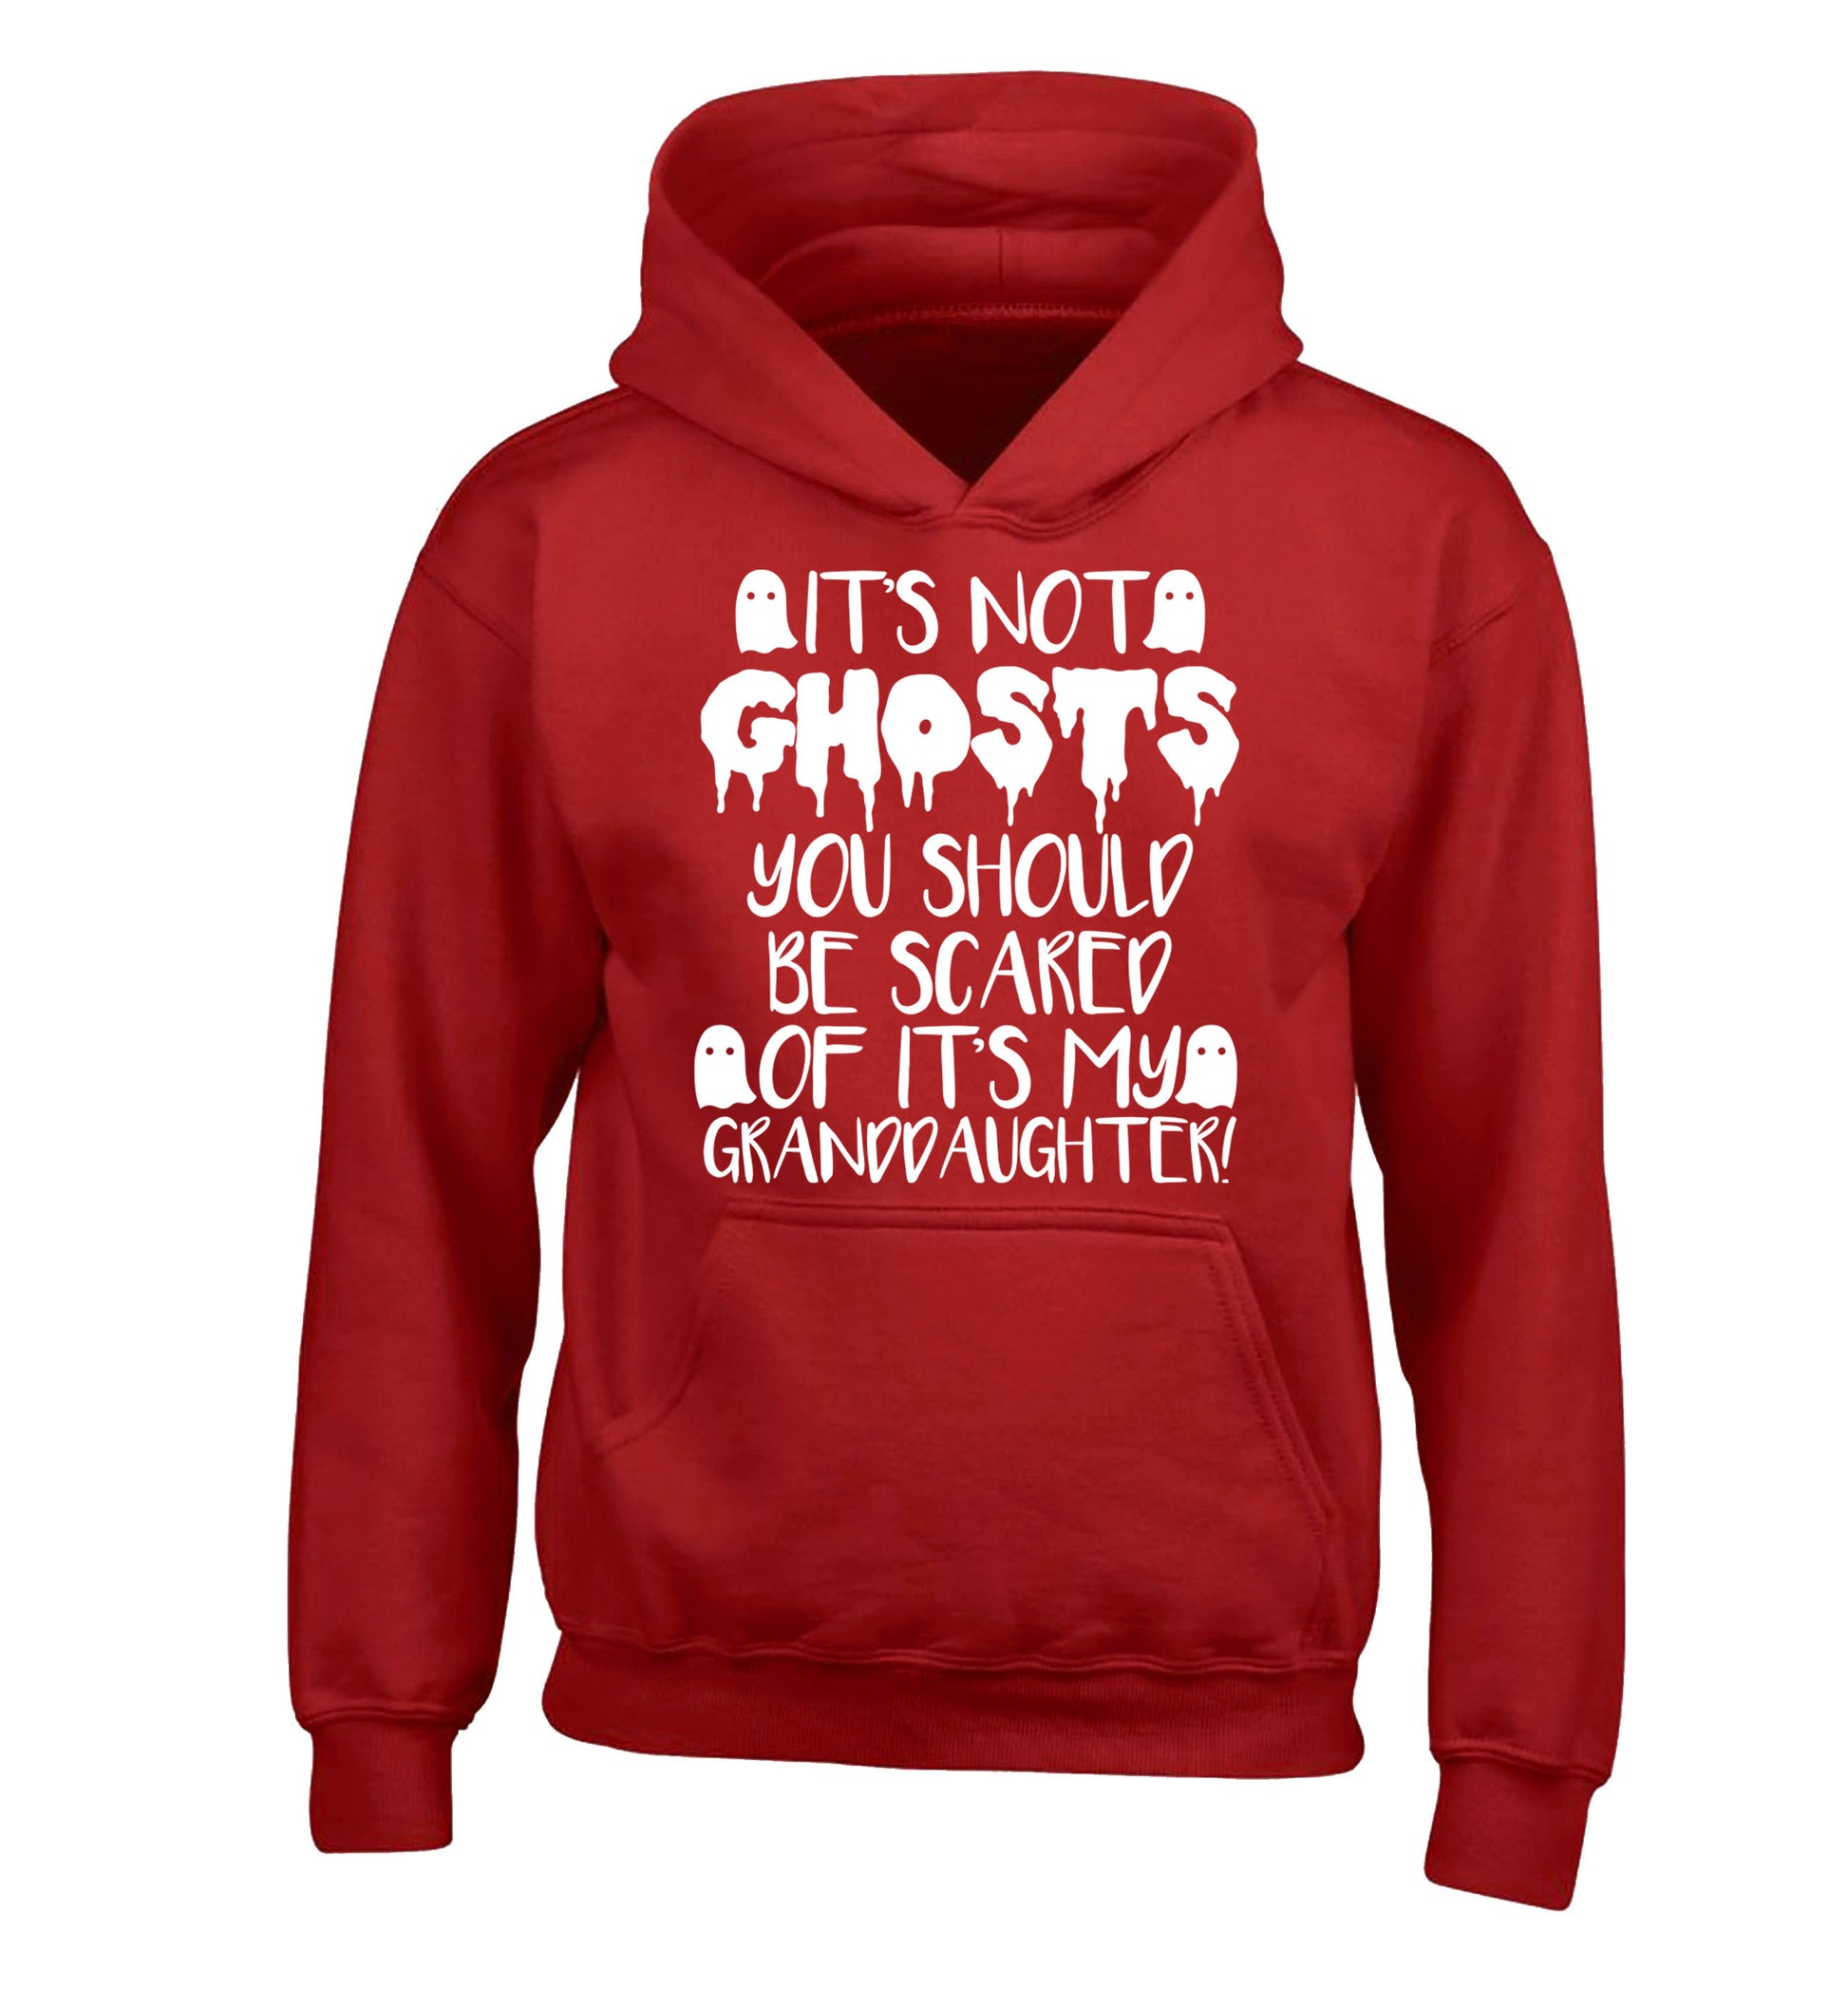 It's not ghosts you should be scared of it's my granddaughter! children's red hoodie 12-14 Years